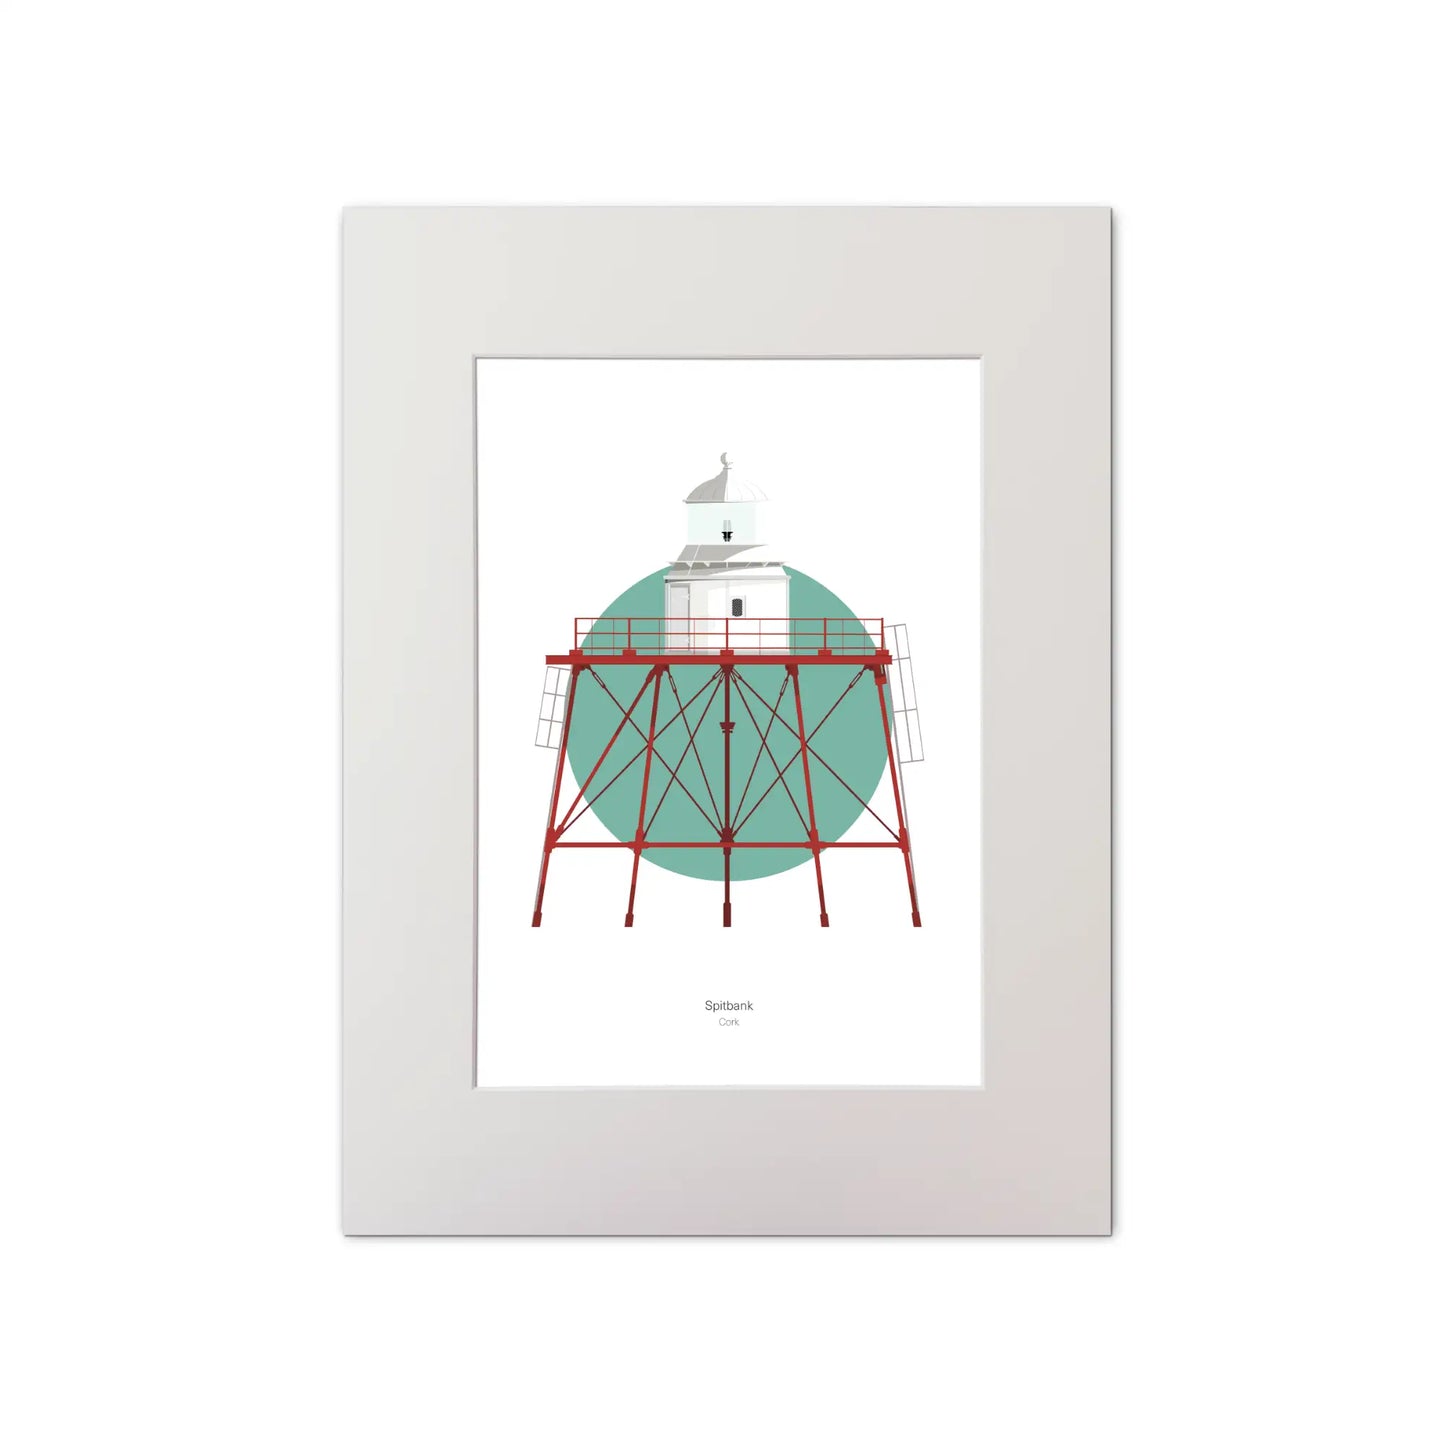 Illustration of Spitbank lighthouse on a white background inside light blue square, mounted and measuring 30x40cm.